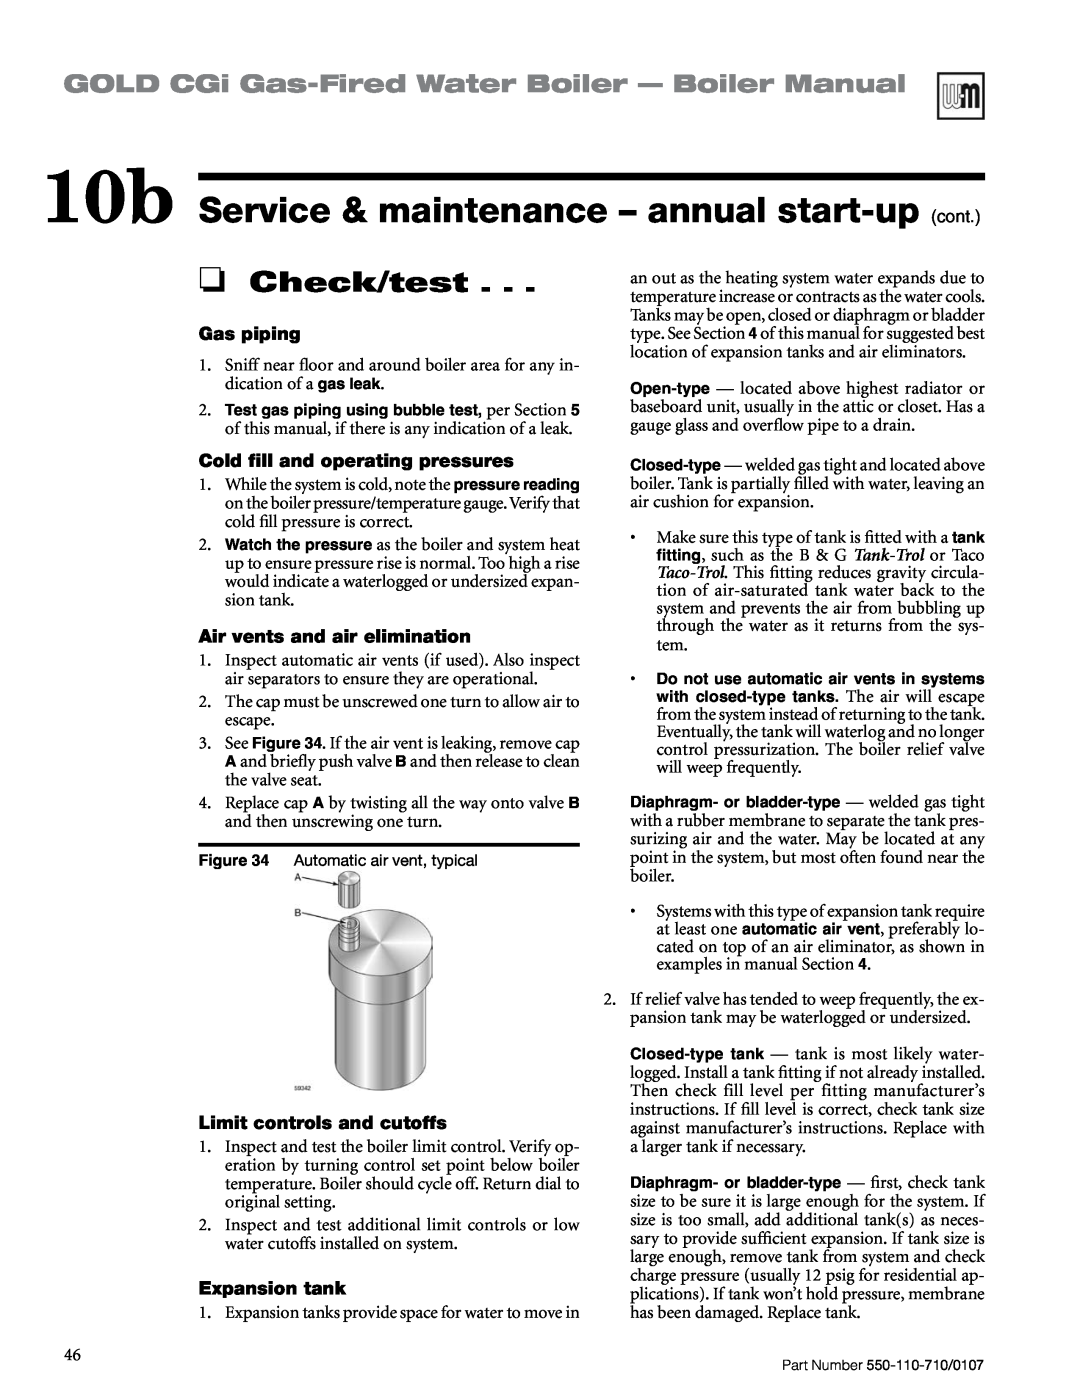 Weil-McLain Series 2 Check/test, 10b Service & maintenance – annual start-up cont, Gas piping, Limit controls and cutoffs 